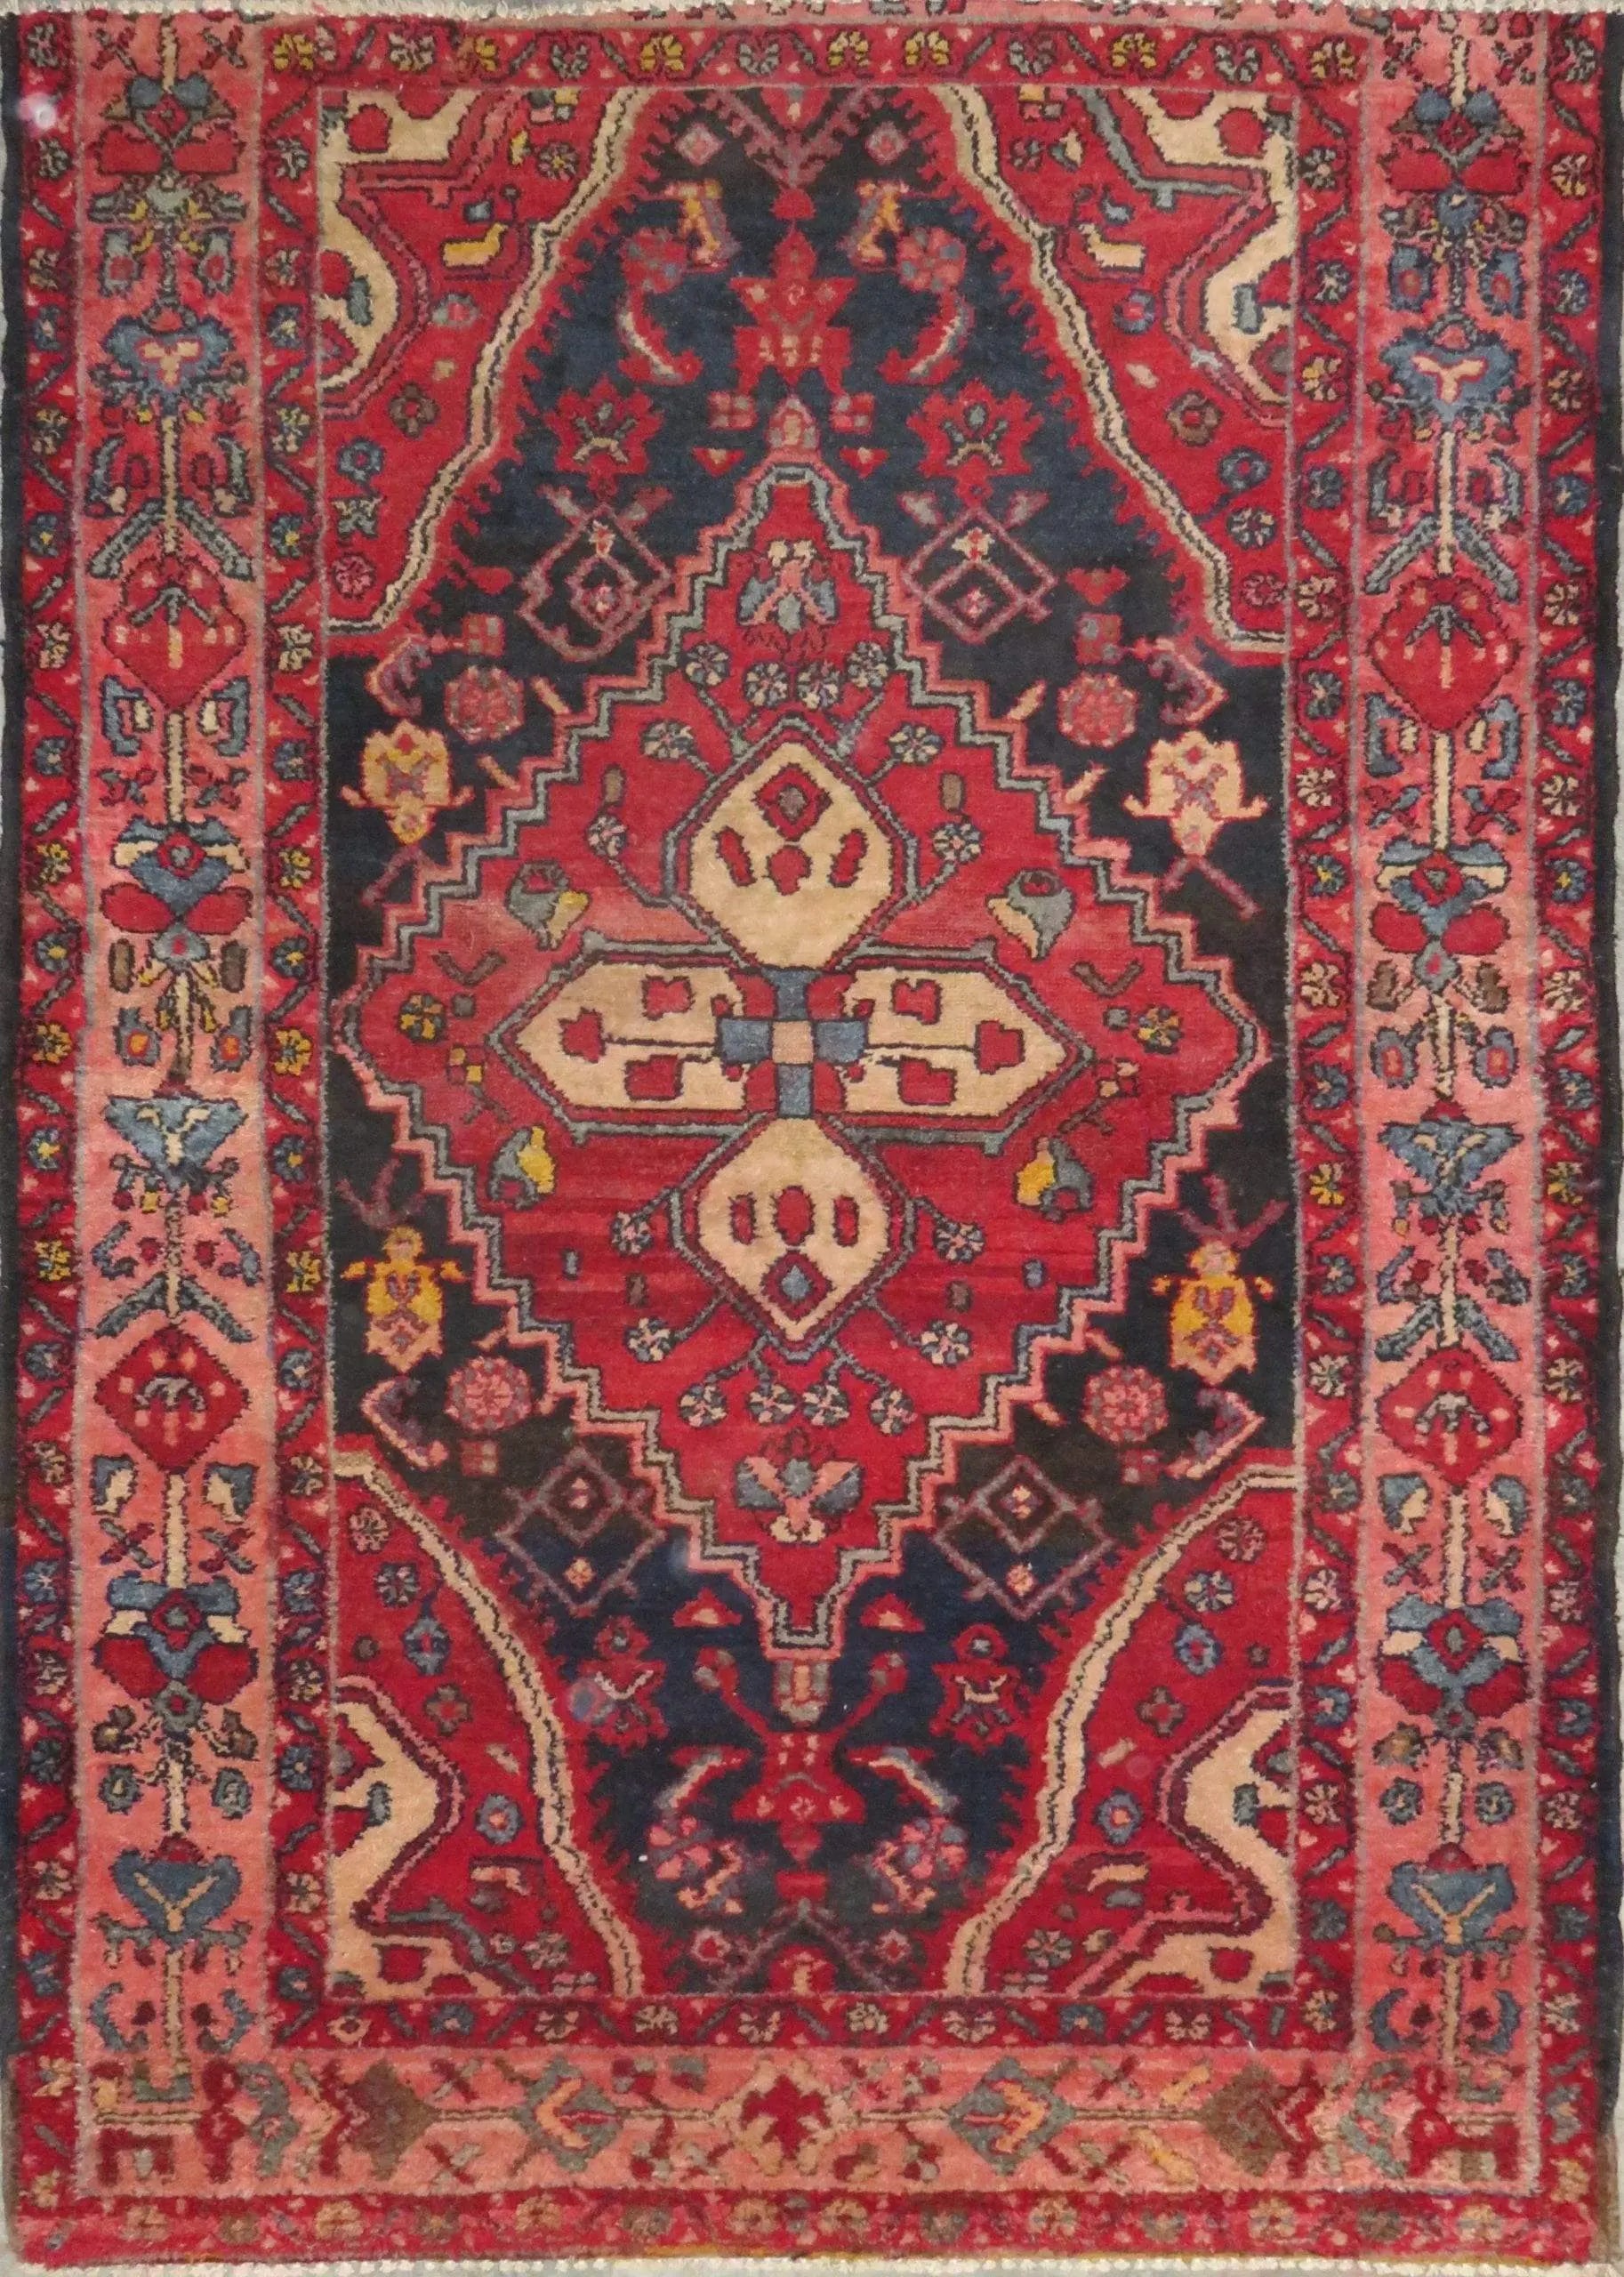 Hand-Knotted Persian Wool Rug _ Luxurious Vintage Design, 5'10" x 3'9", Artisan Crafted